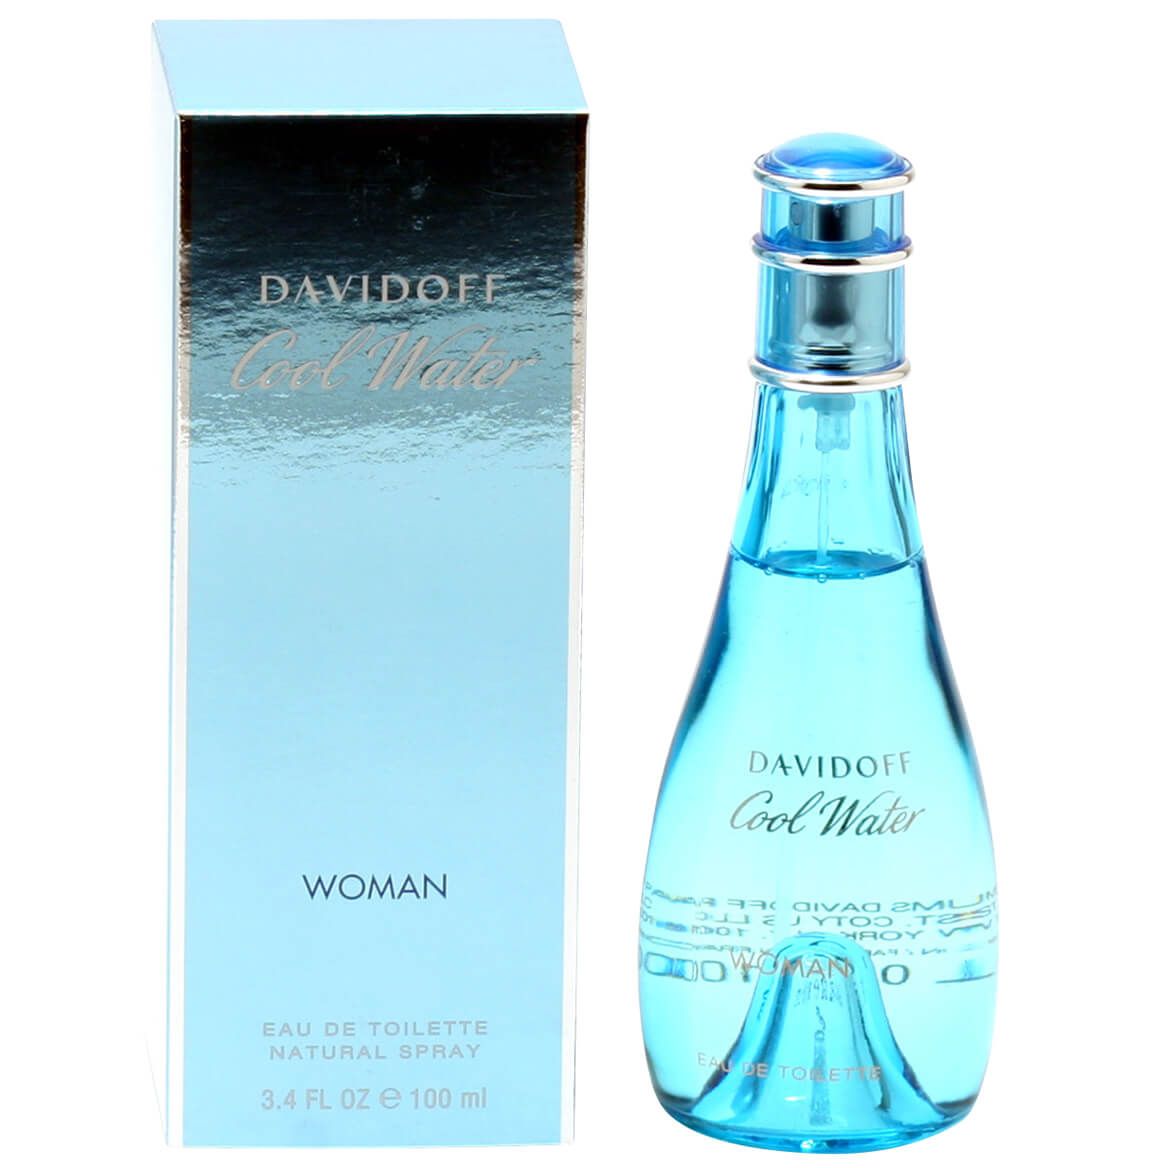 Cool Water by Davidoff for Women EDT, 3.4 fl. oz. + '-' + 377154